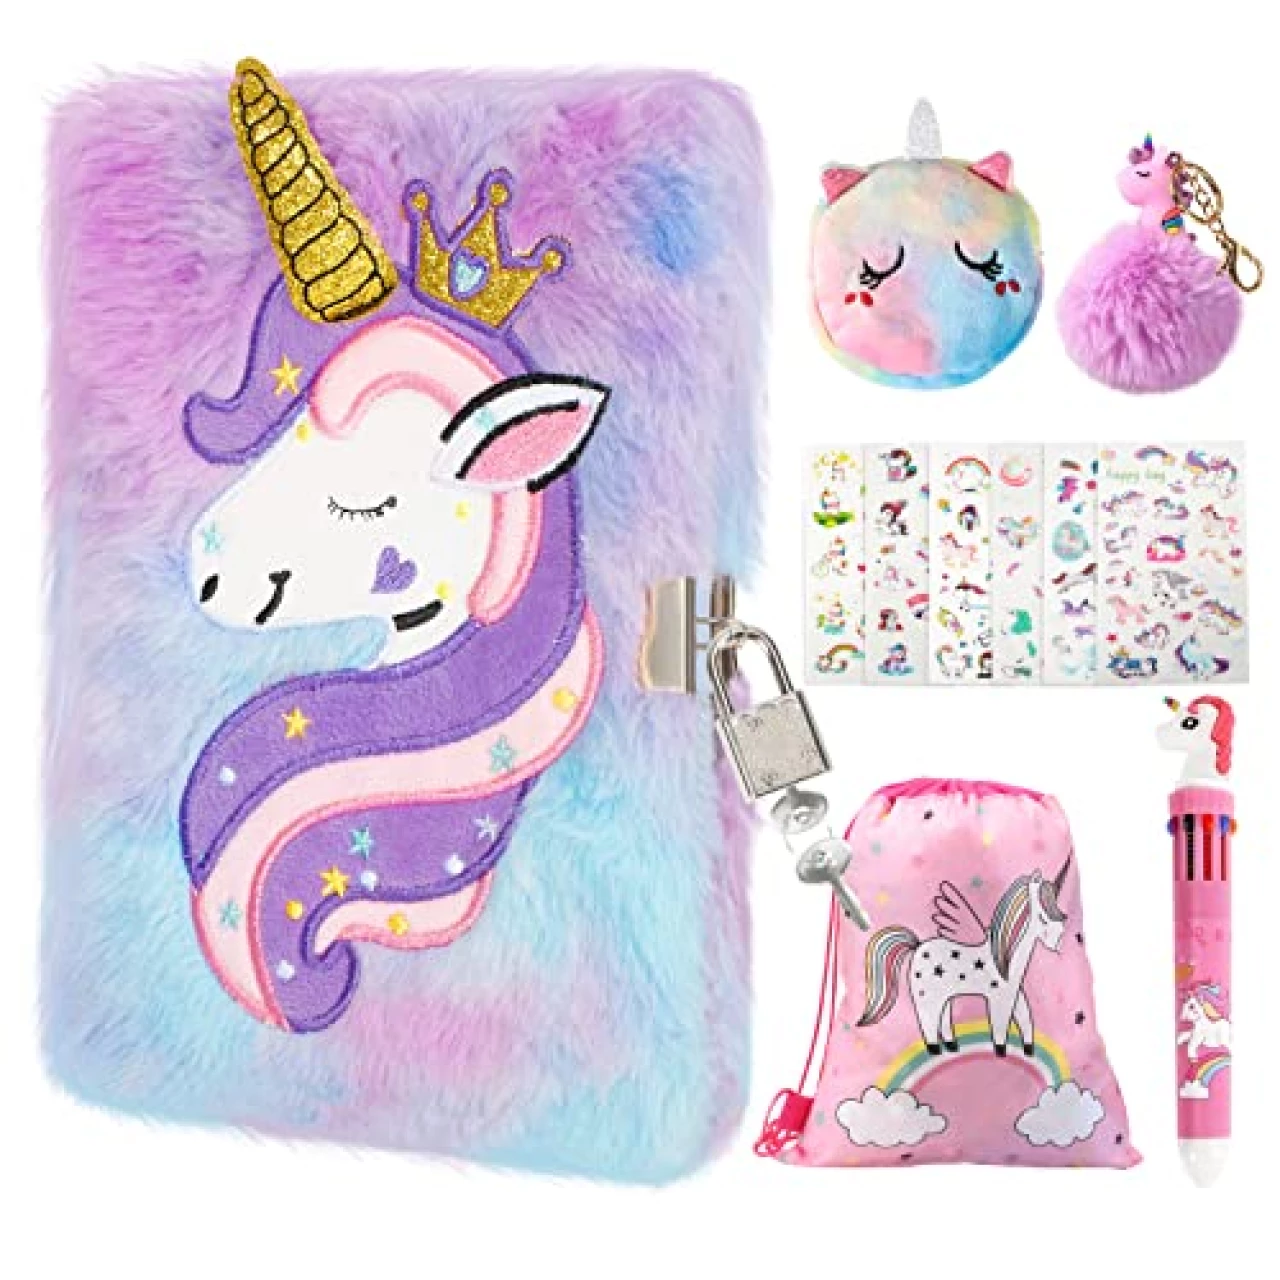 homicozy Kids Unicorn Diary with Lock and Key, Tie-Dye Fuzzy Journal for Girls Ages 6 And Up, Hardcover Notebook with 160 Pages, Cute Stationery Unicorn Gift for Girls